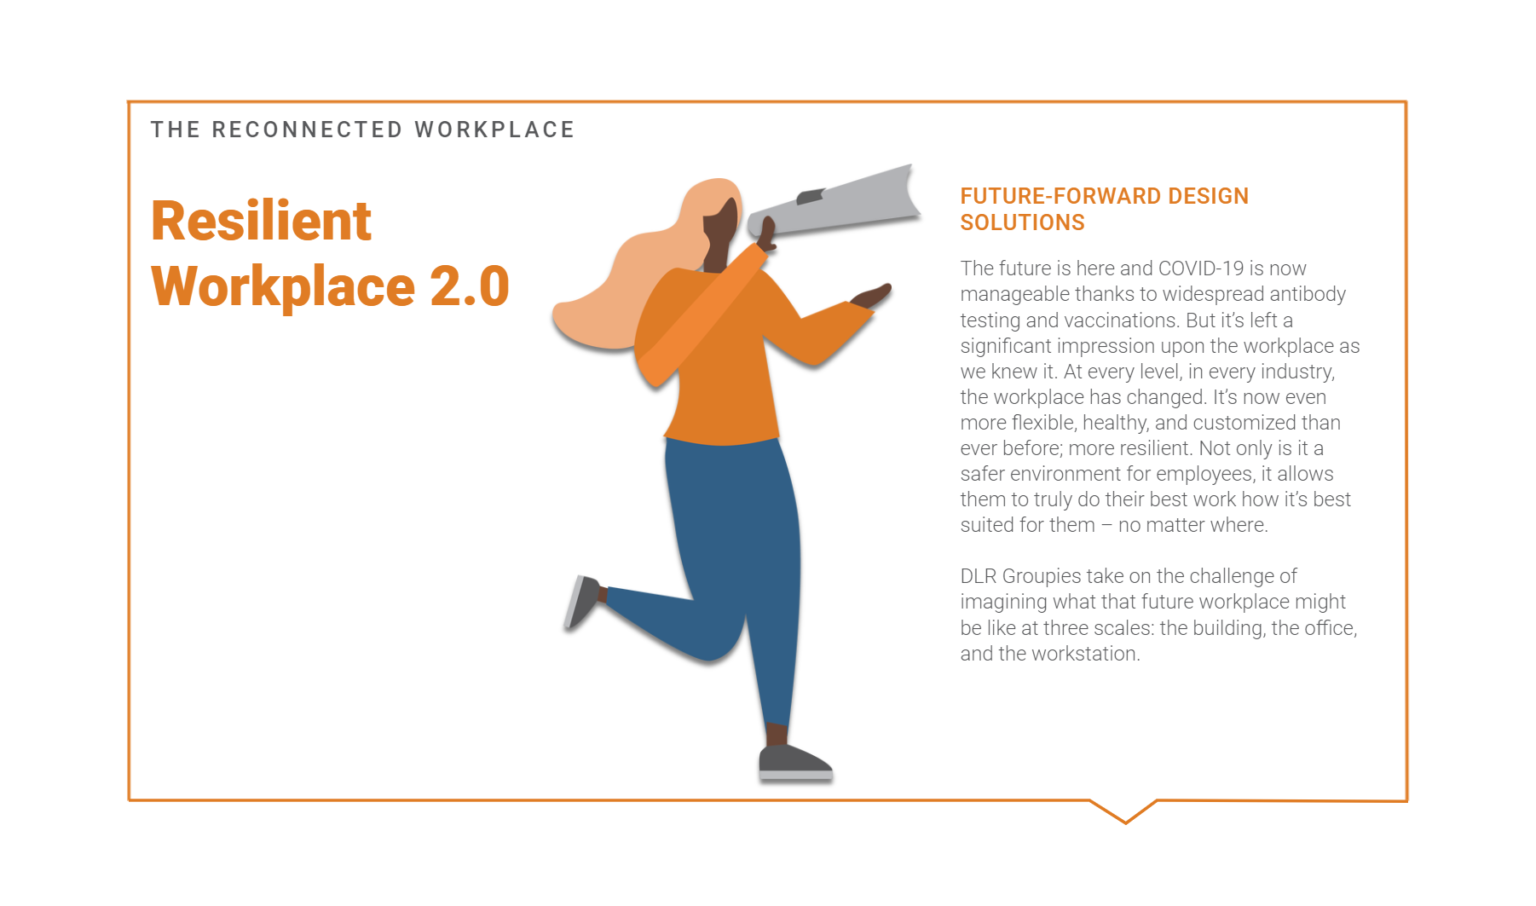 Infographic titled Resilient Workplace 2.0, the Reconnected Workplace, discussing Future Forward Design Solutions